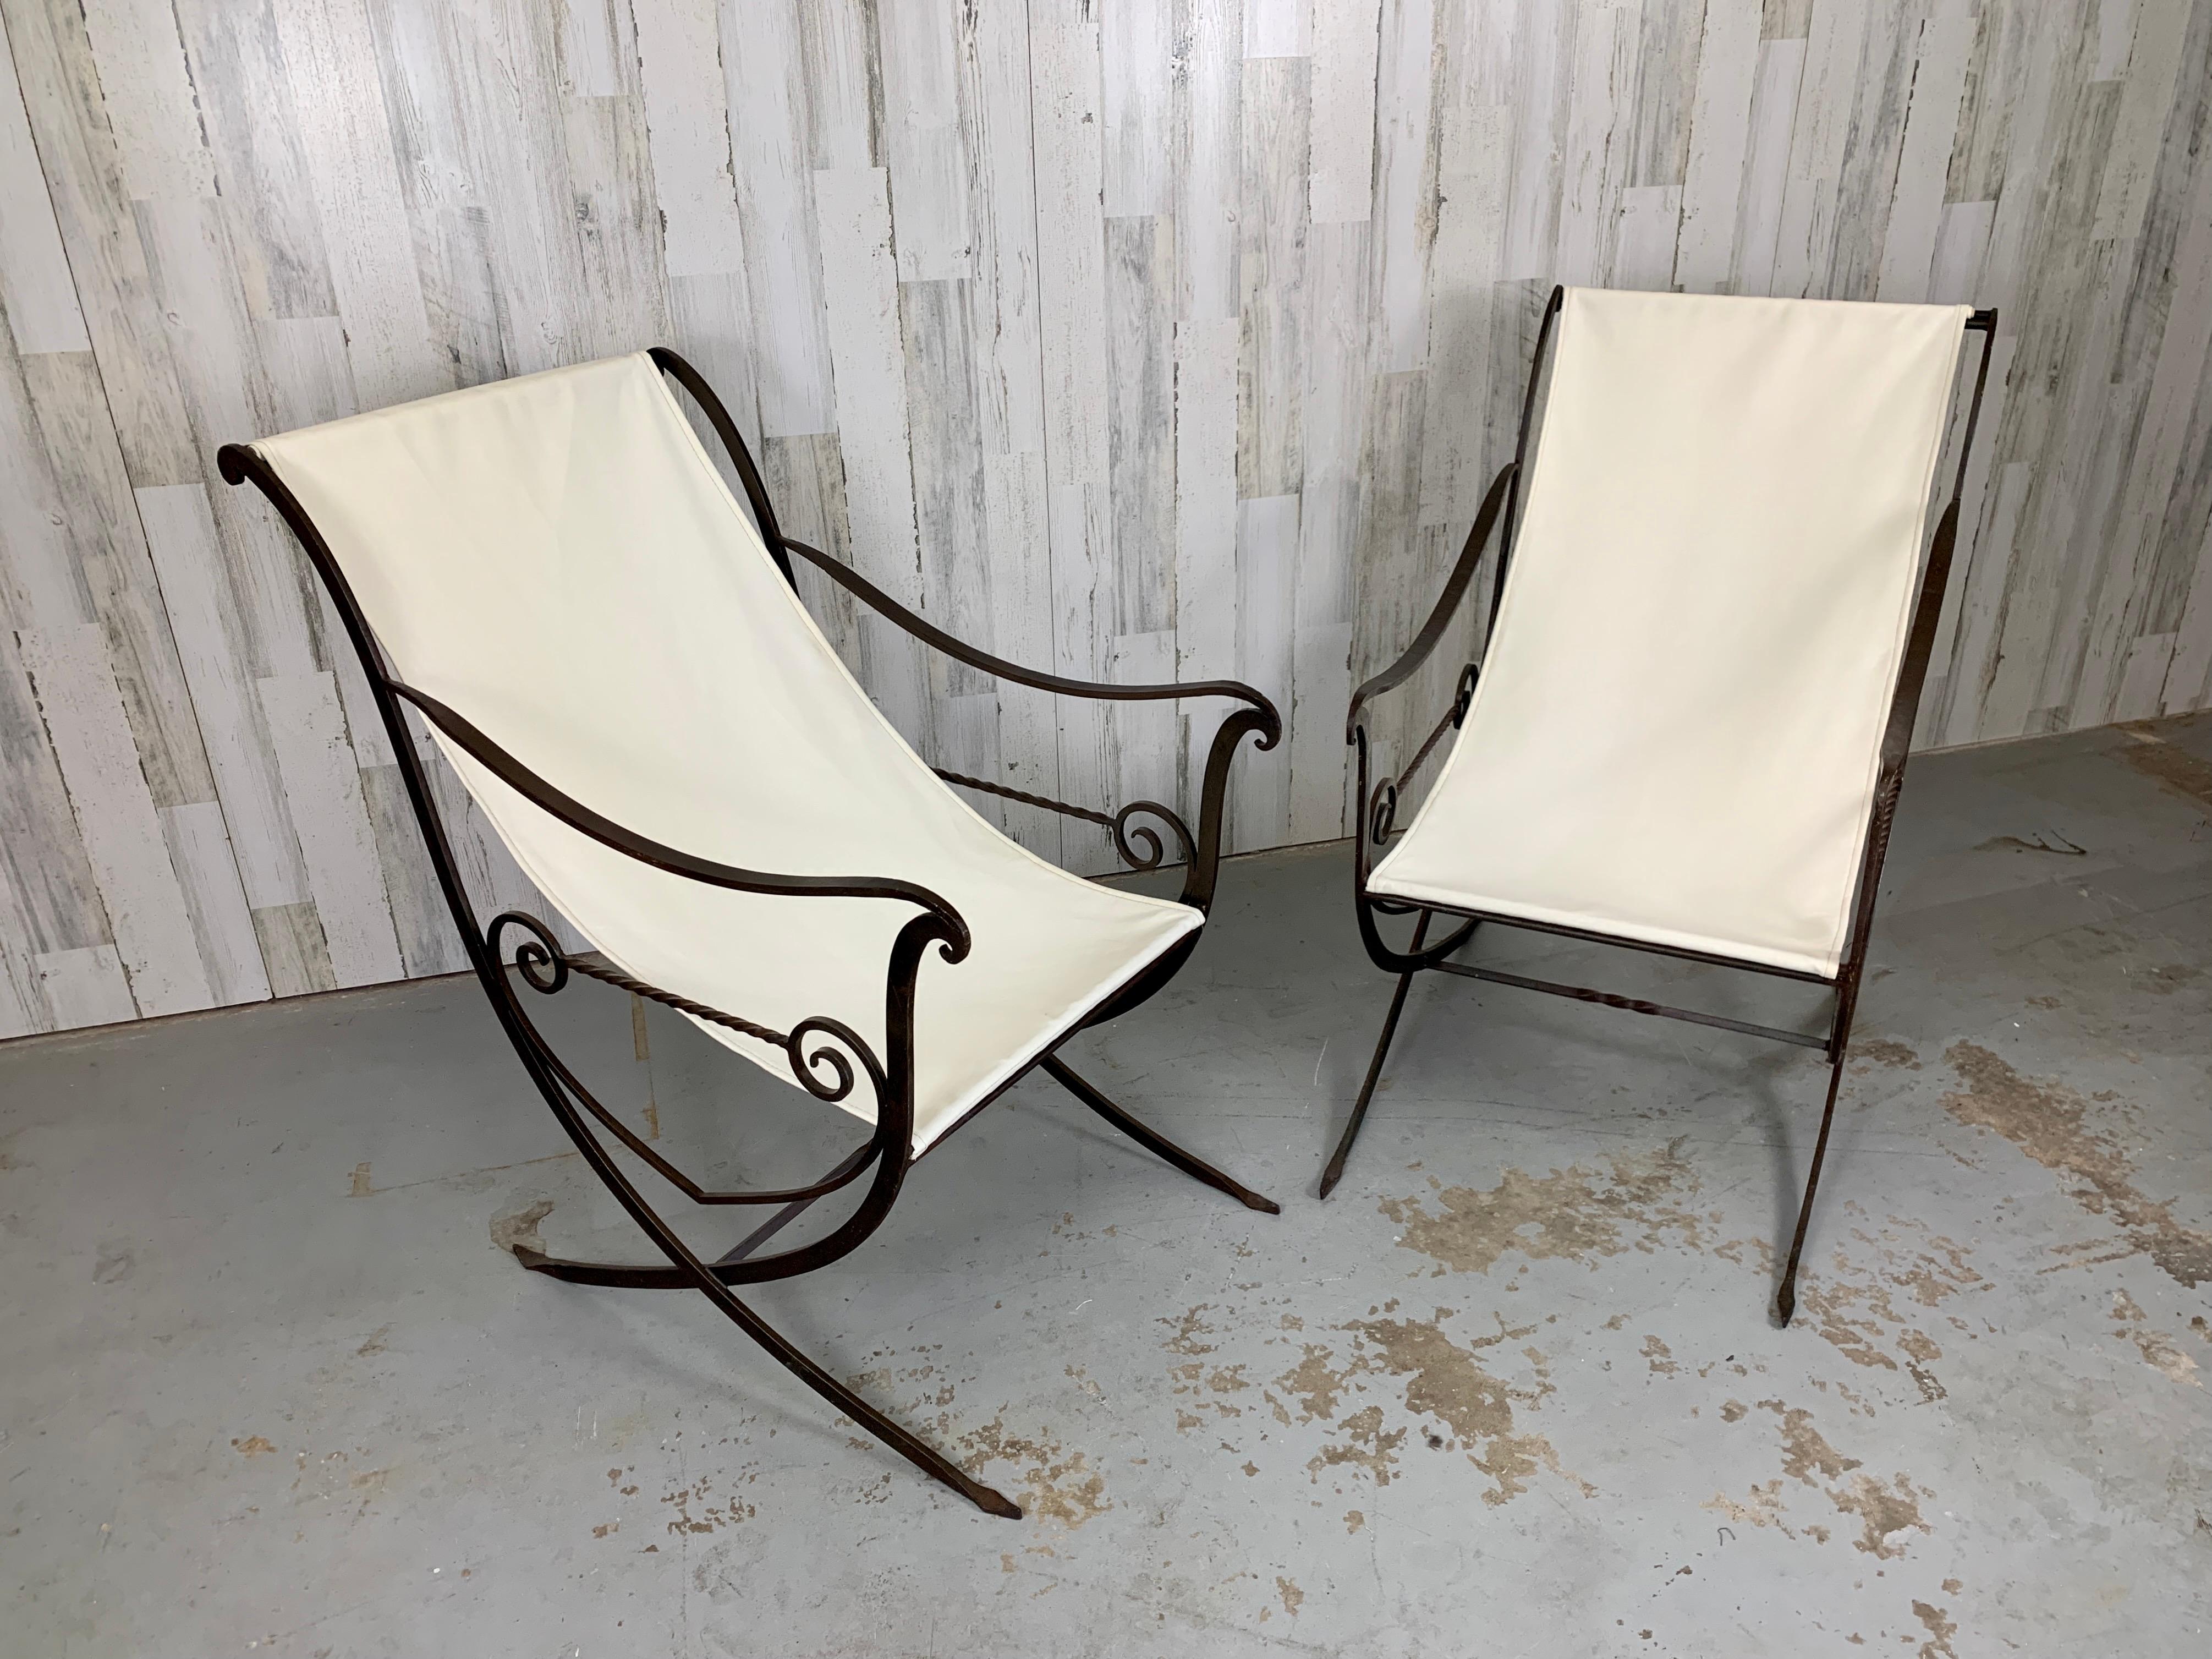 Canvas Sculpted Forged Iron Sling Chairs, 1940's For Sale